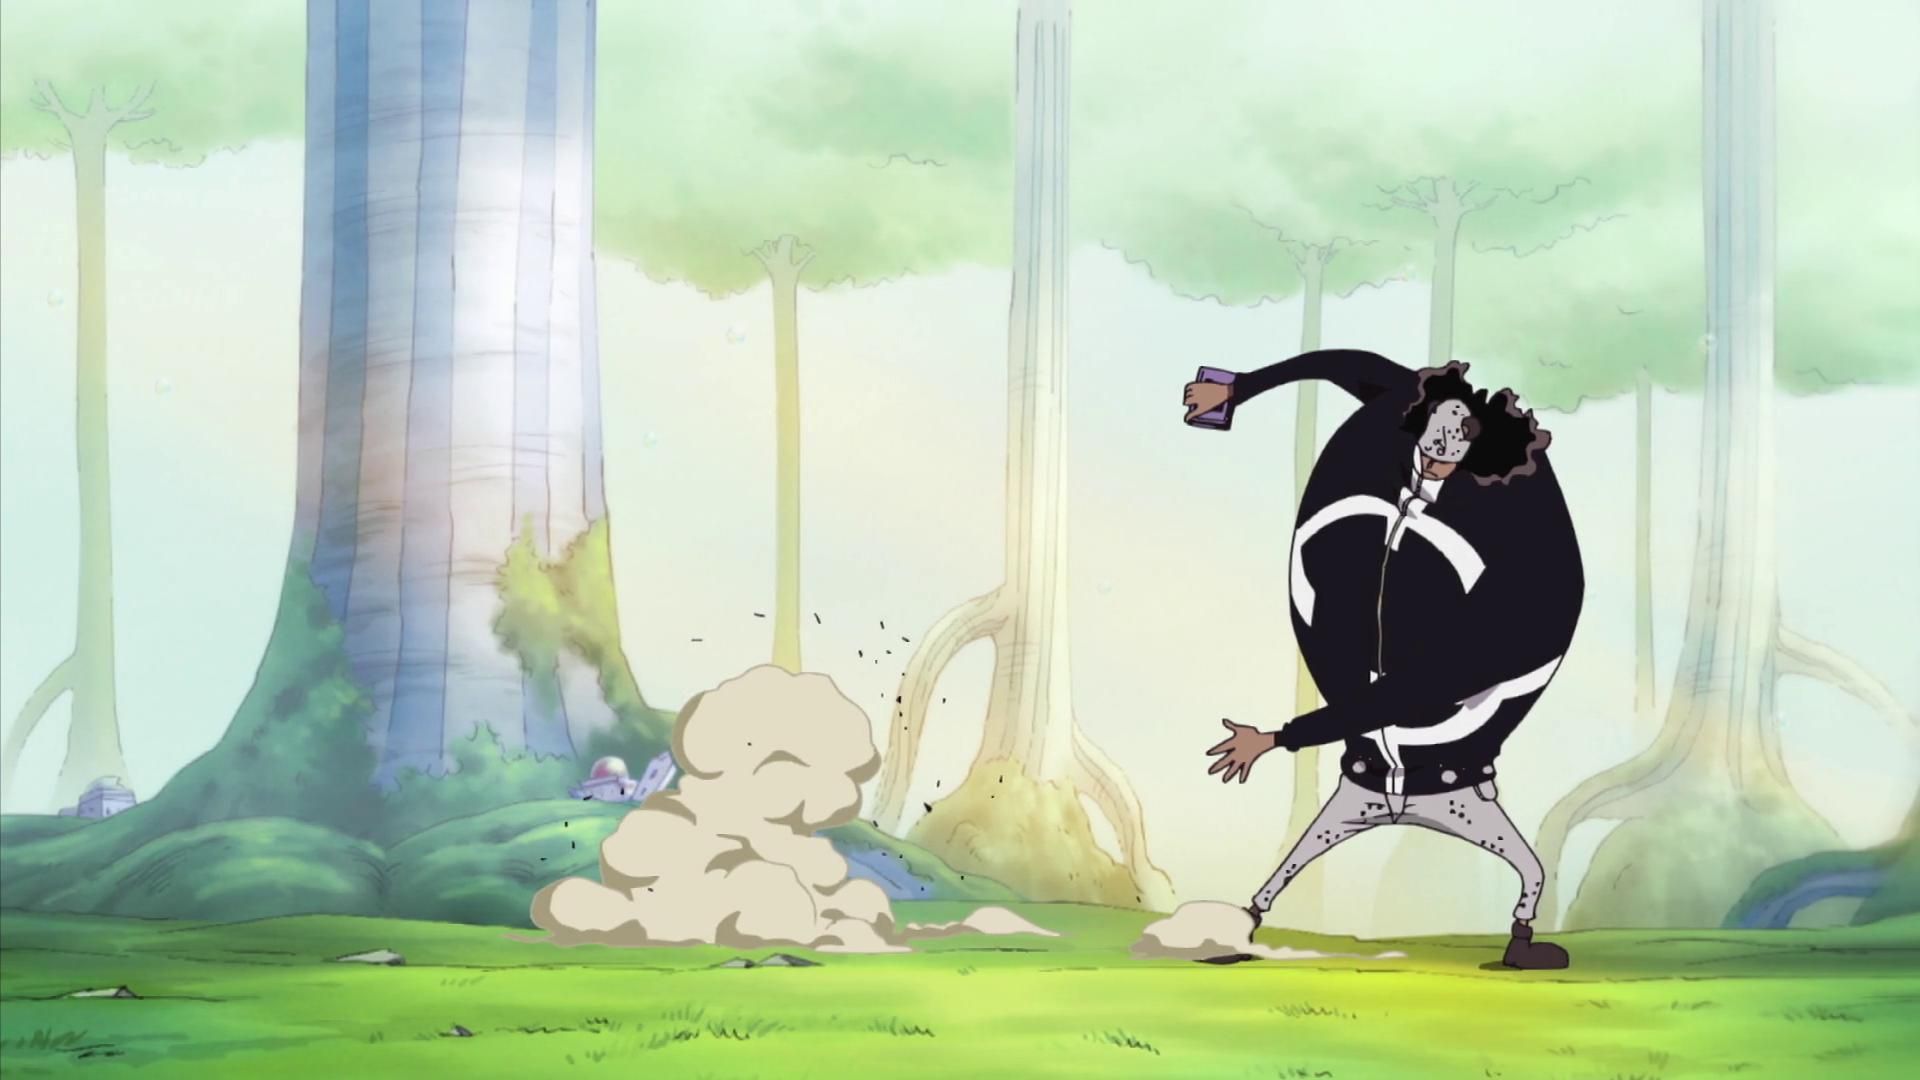 The Paw-Paw Fruit allows Kuma to repel seemingly anything, from weapons to incorporeal things (Image via Toei Animation, One Piece)